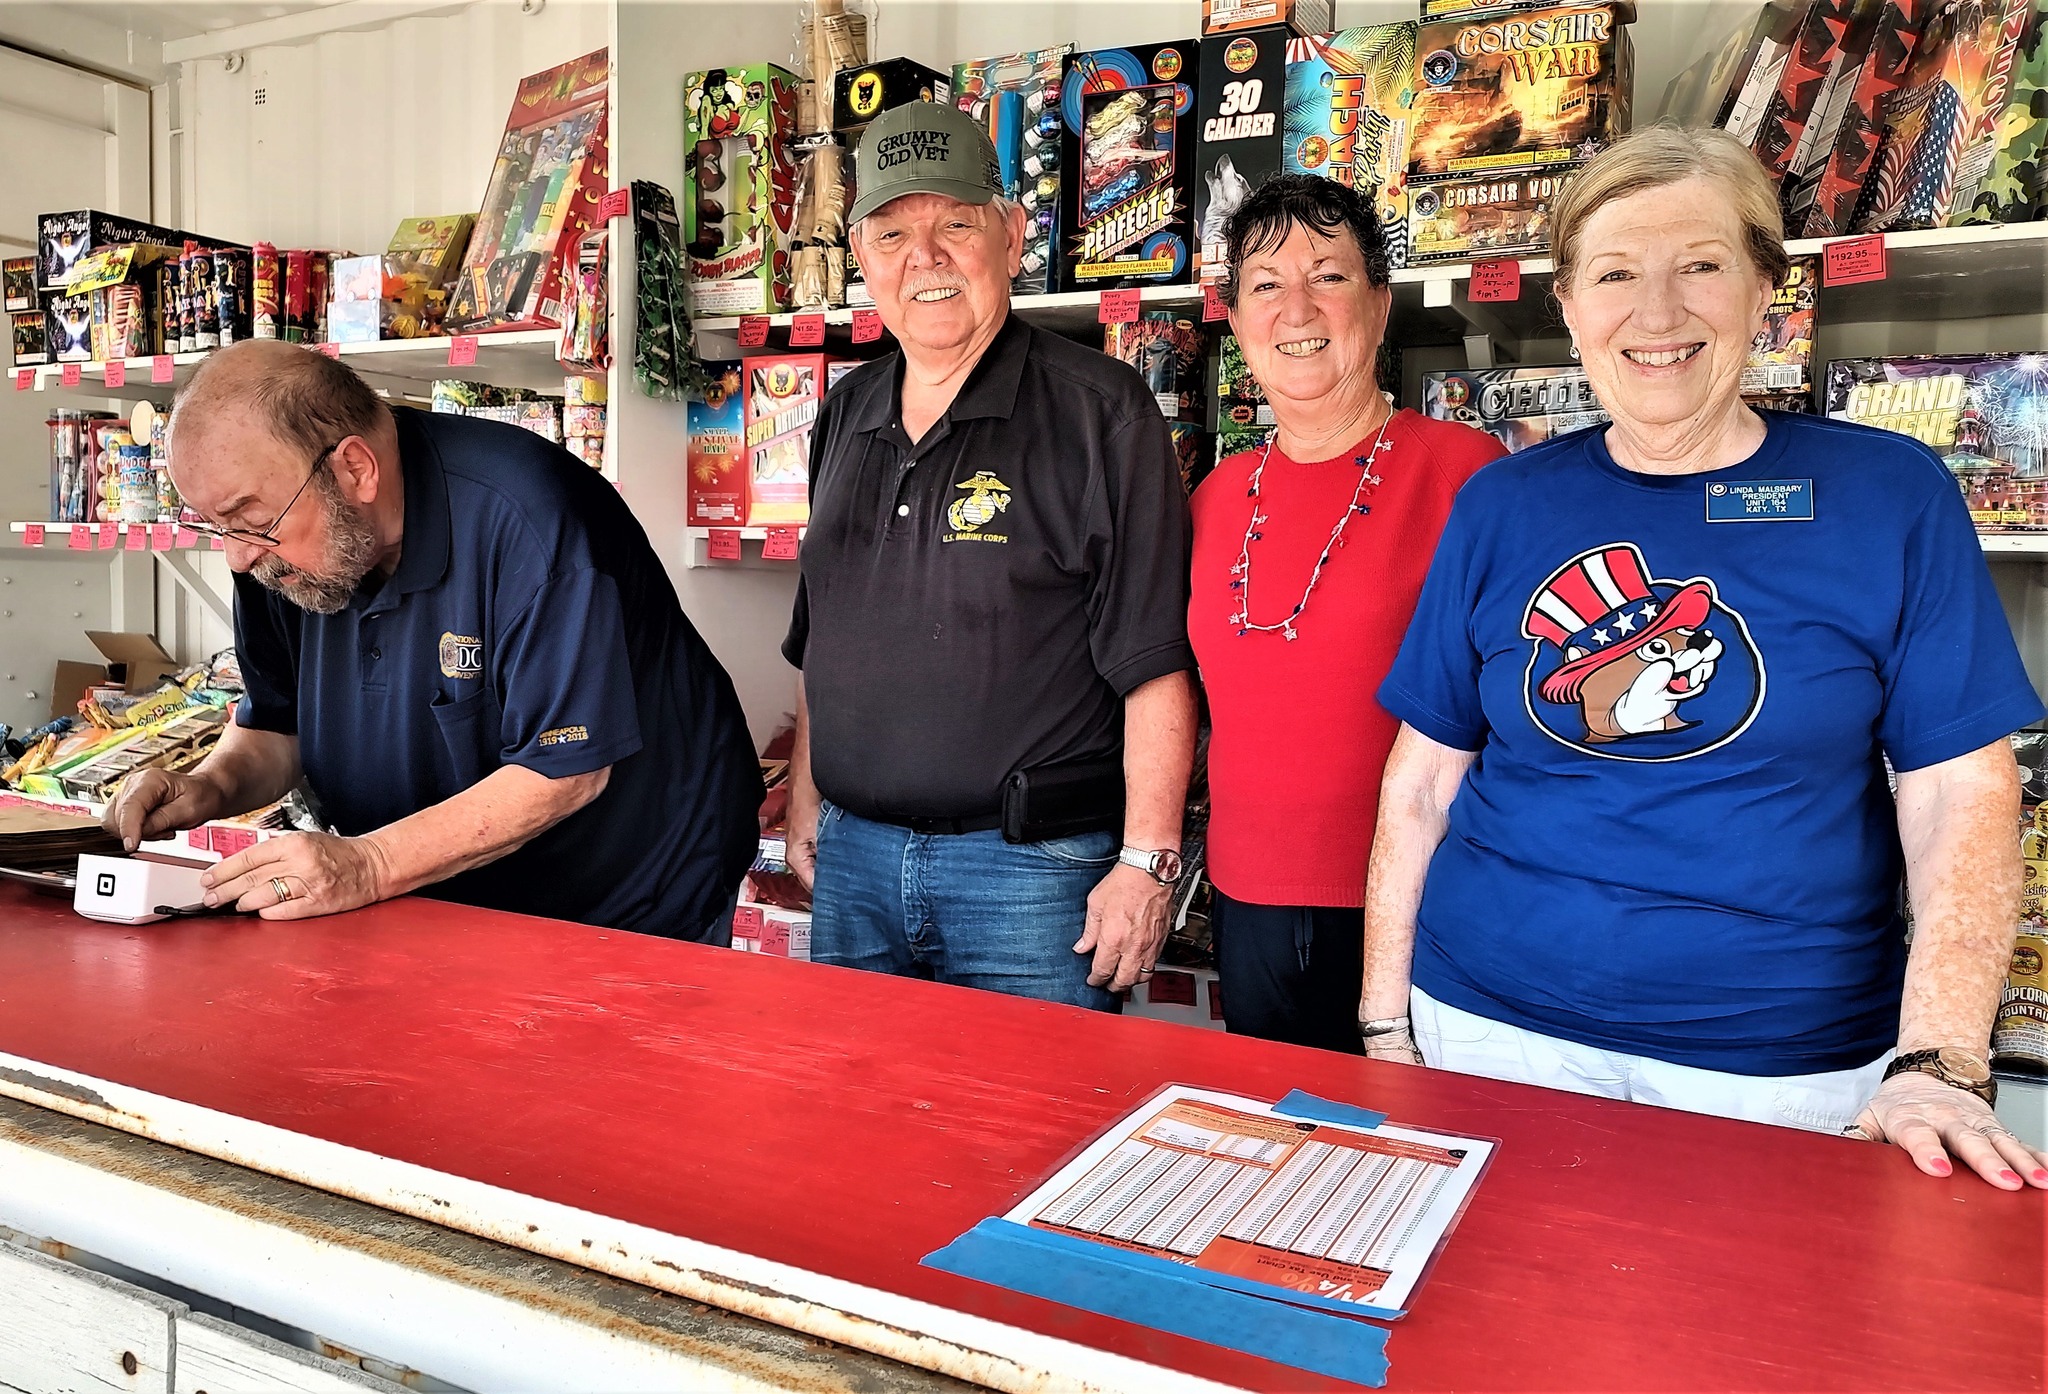 Fireworks With a Purpose: American Legion Post 164 Katy to Sell Fireworks for Fourth of July